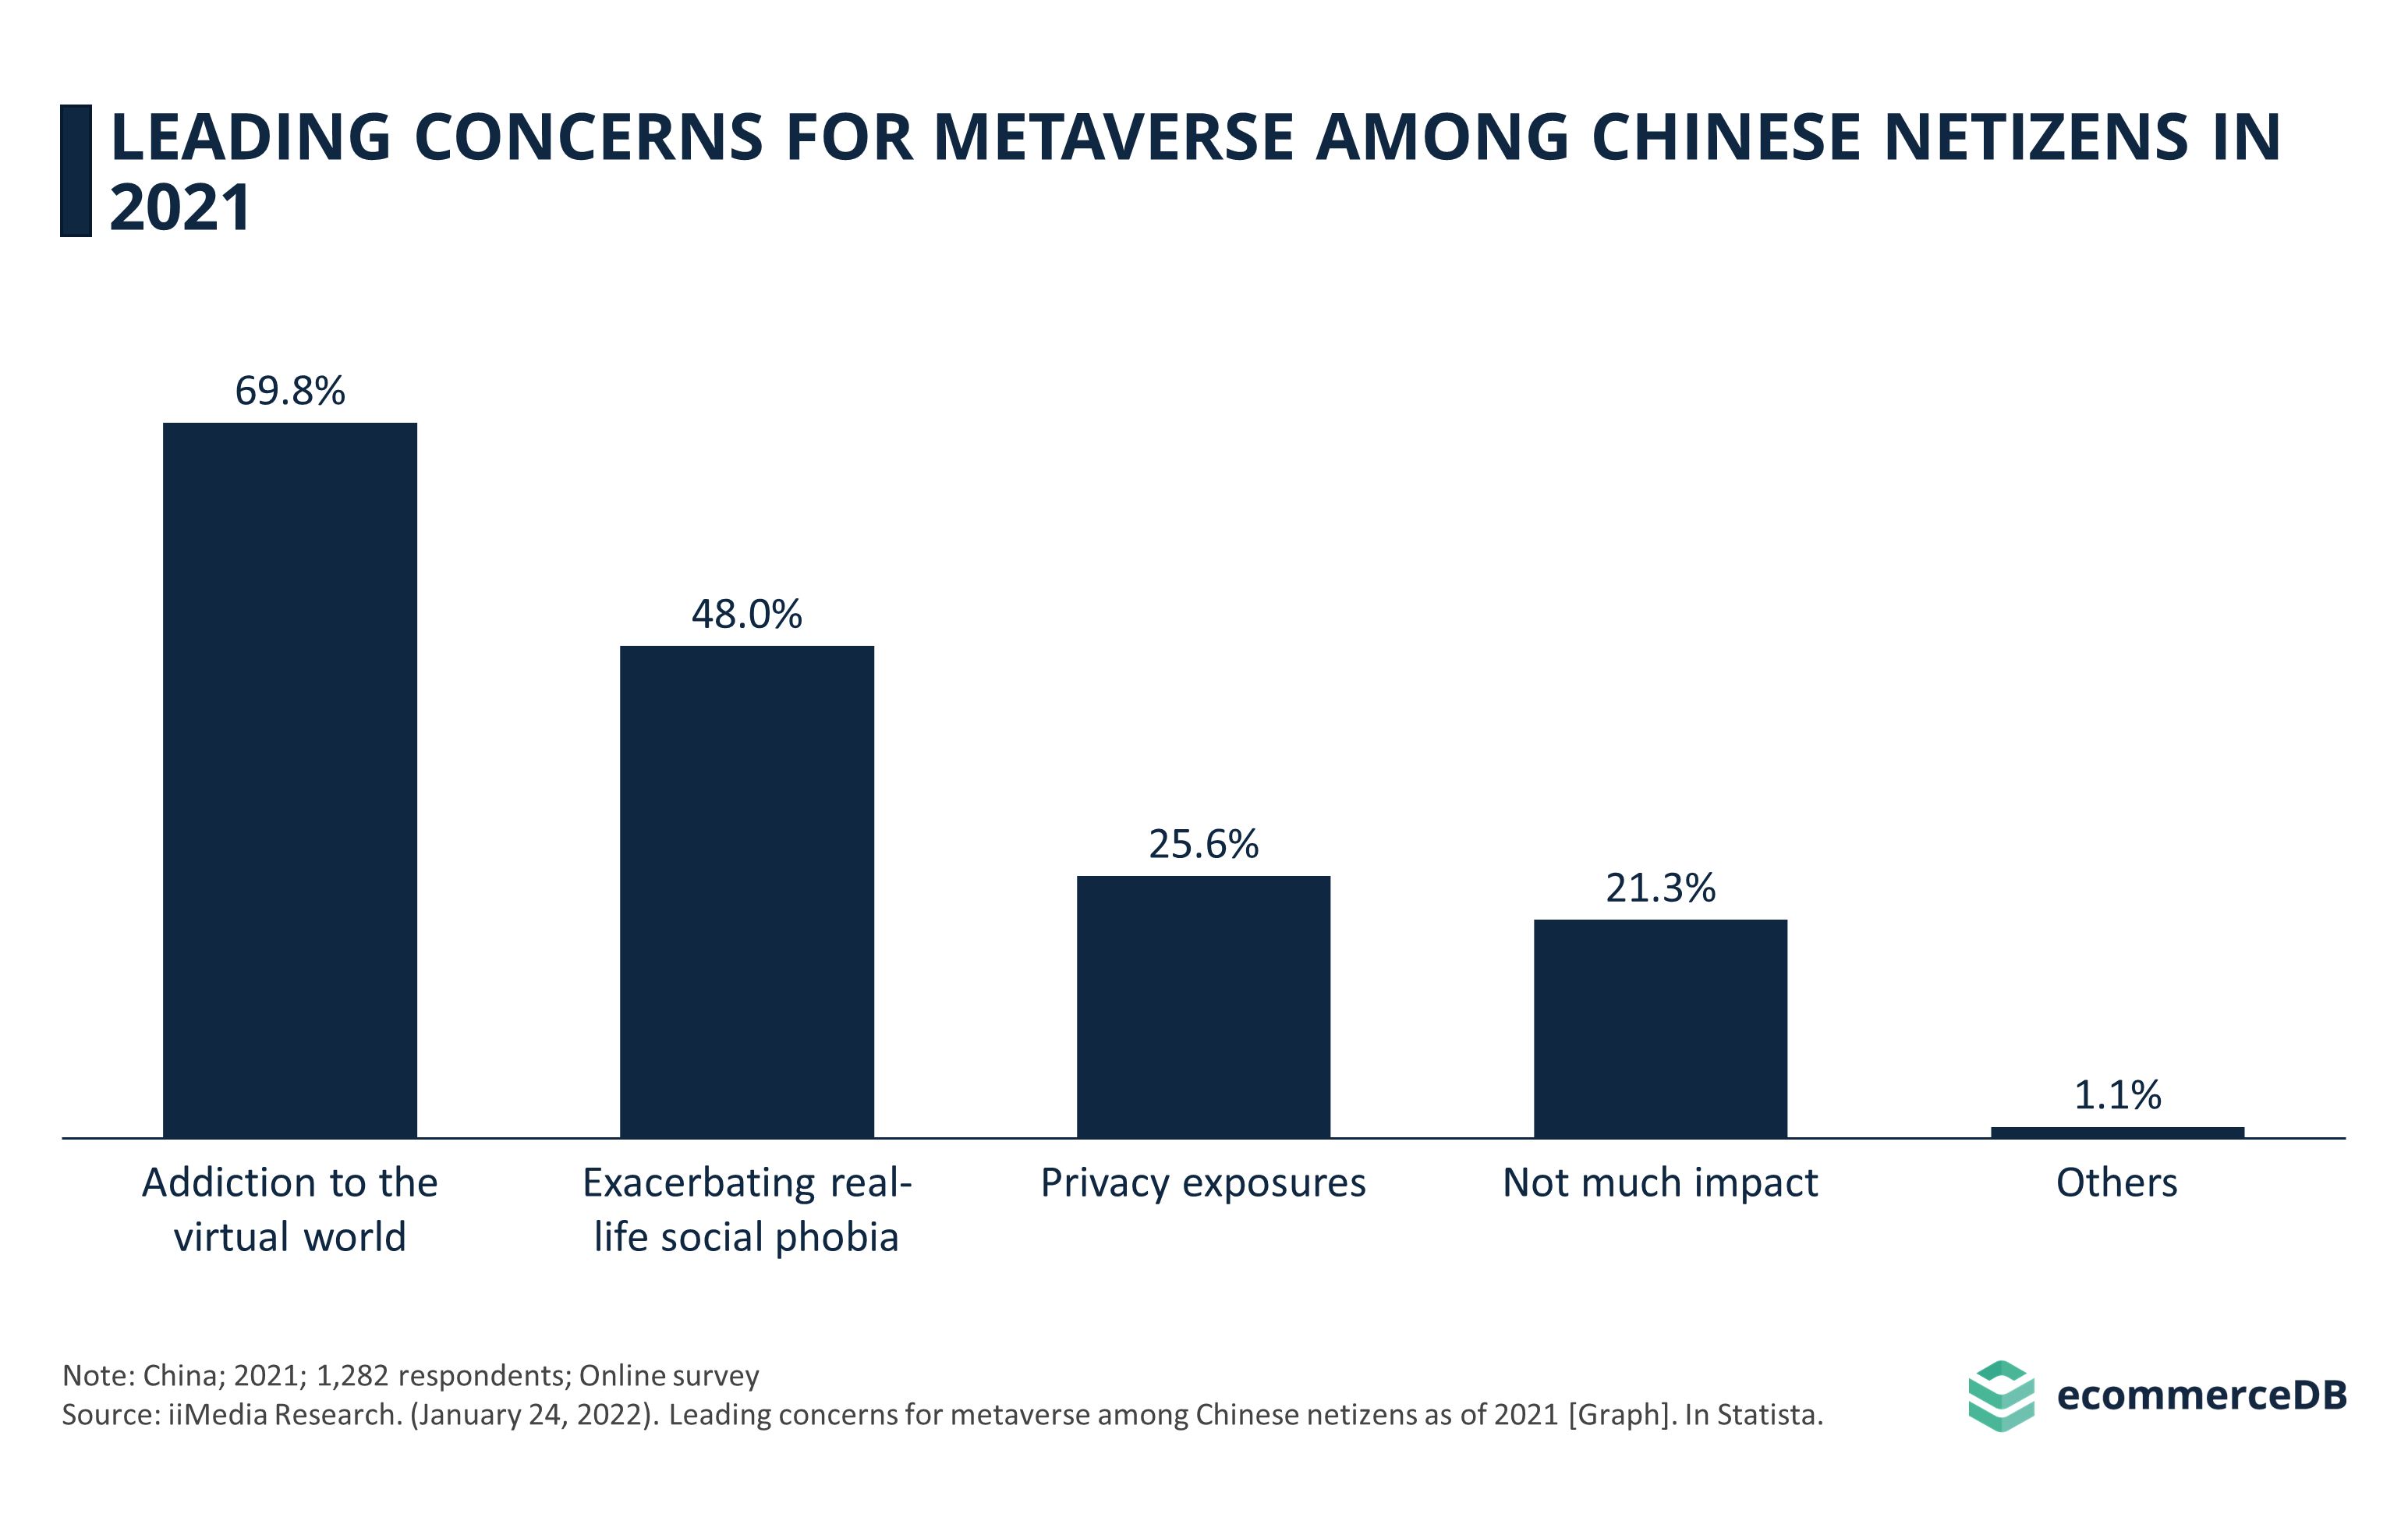 Leading Concerns for Metaverse Among Chinese Netizens in 2021